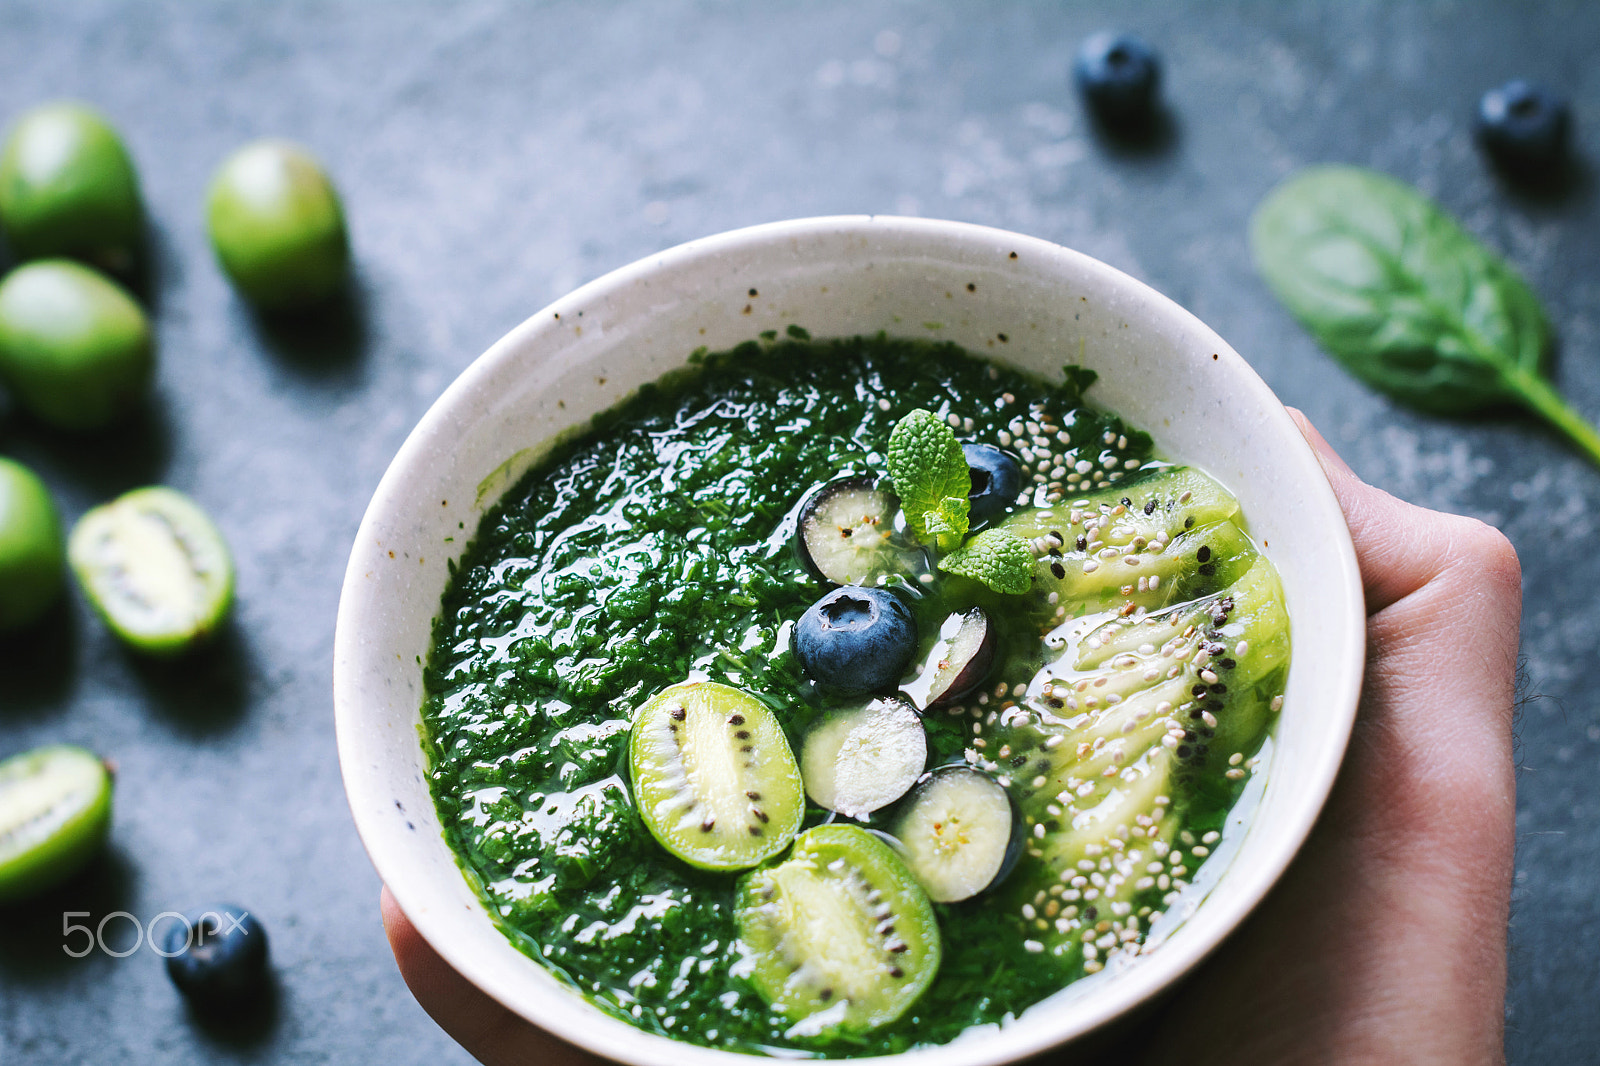 Nikon D7100 sample photo. Green smoothie bowl in a hand photography